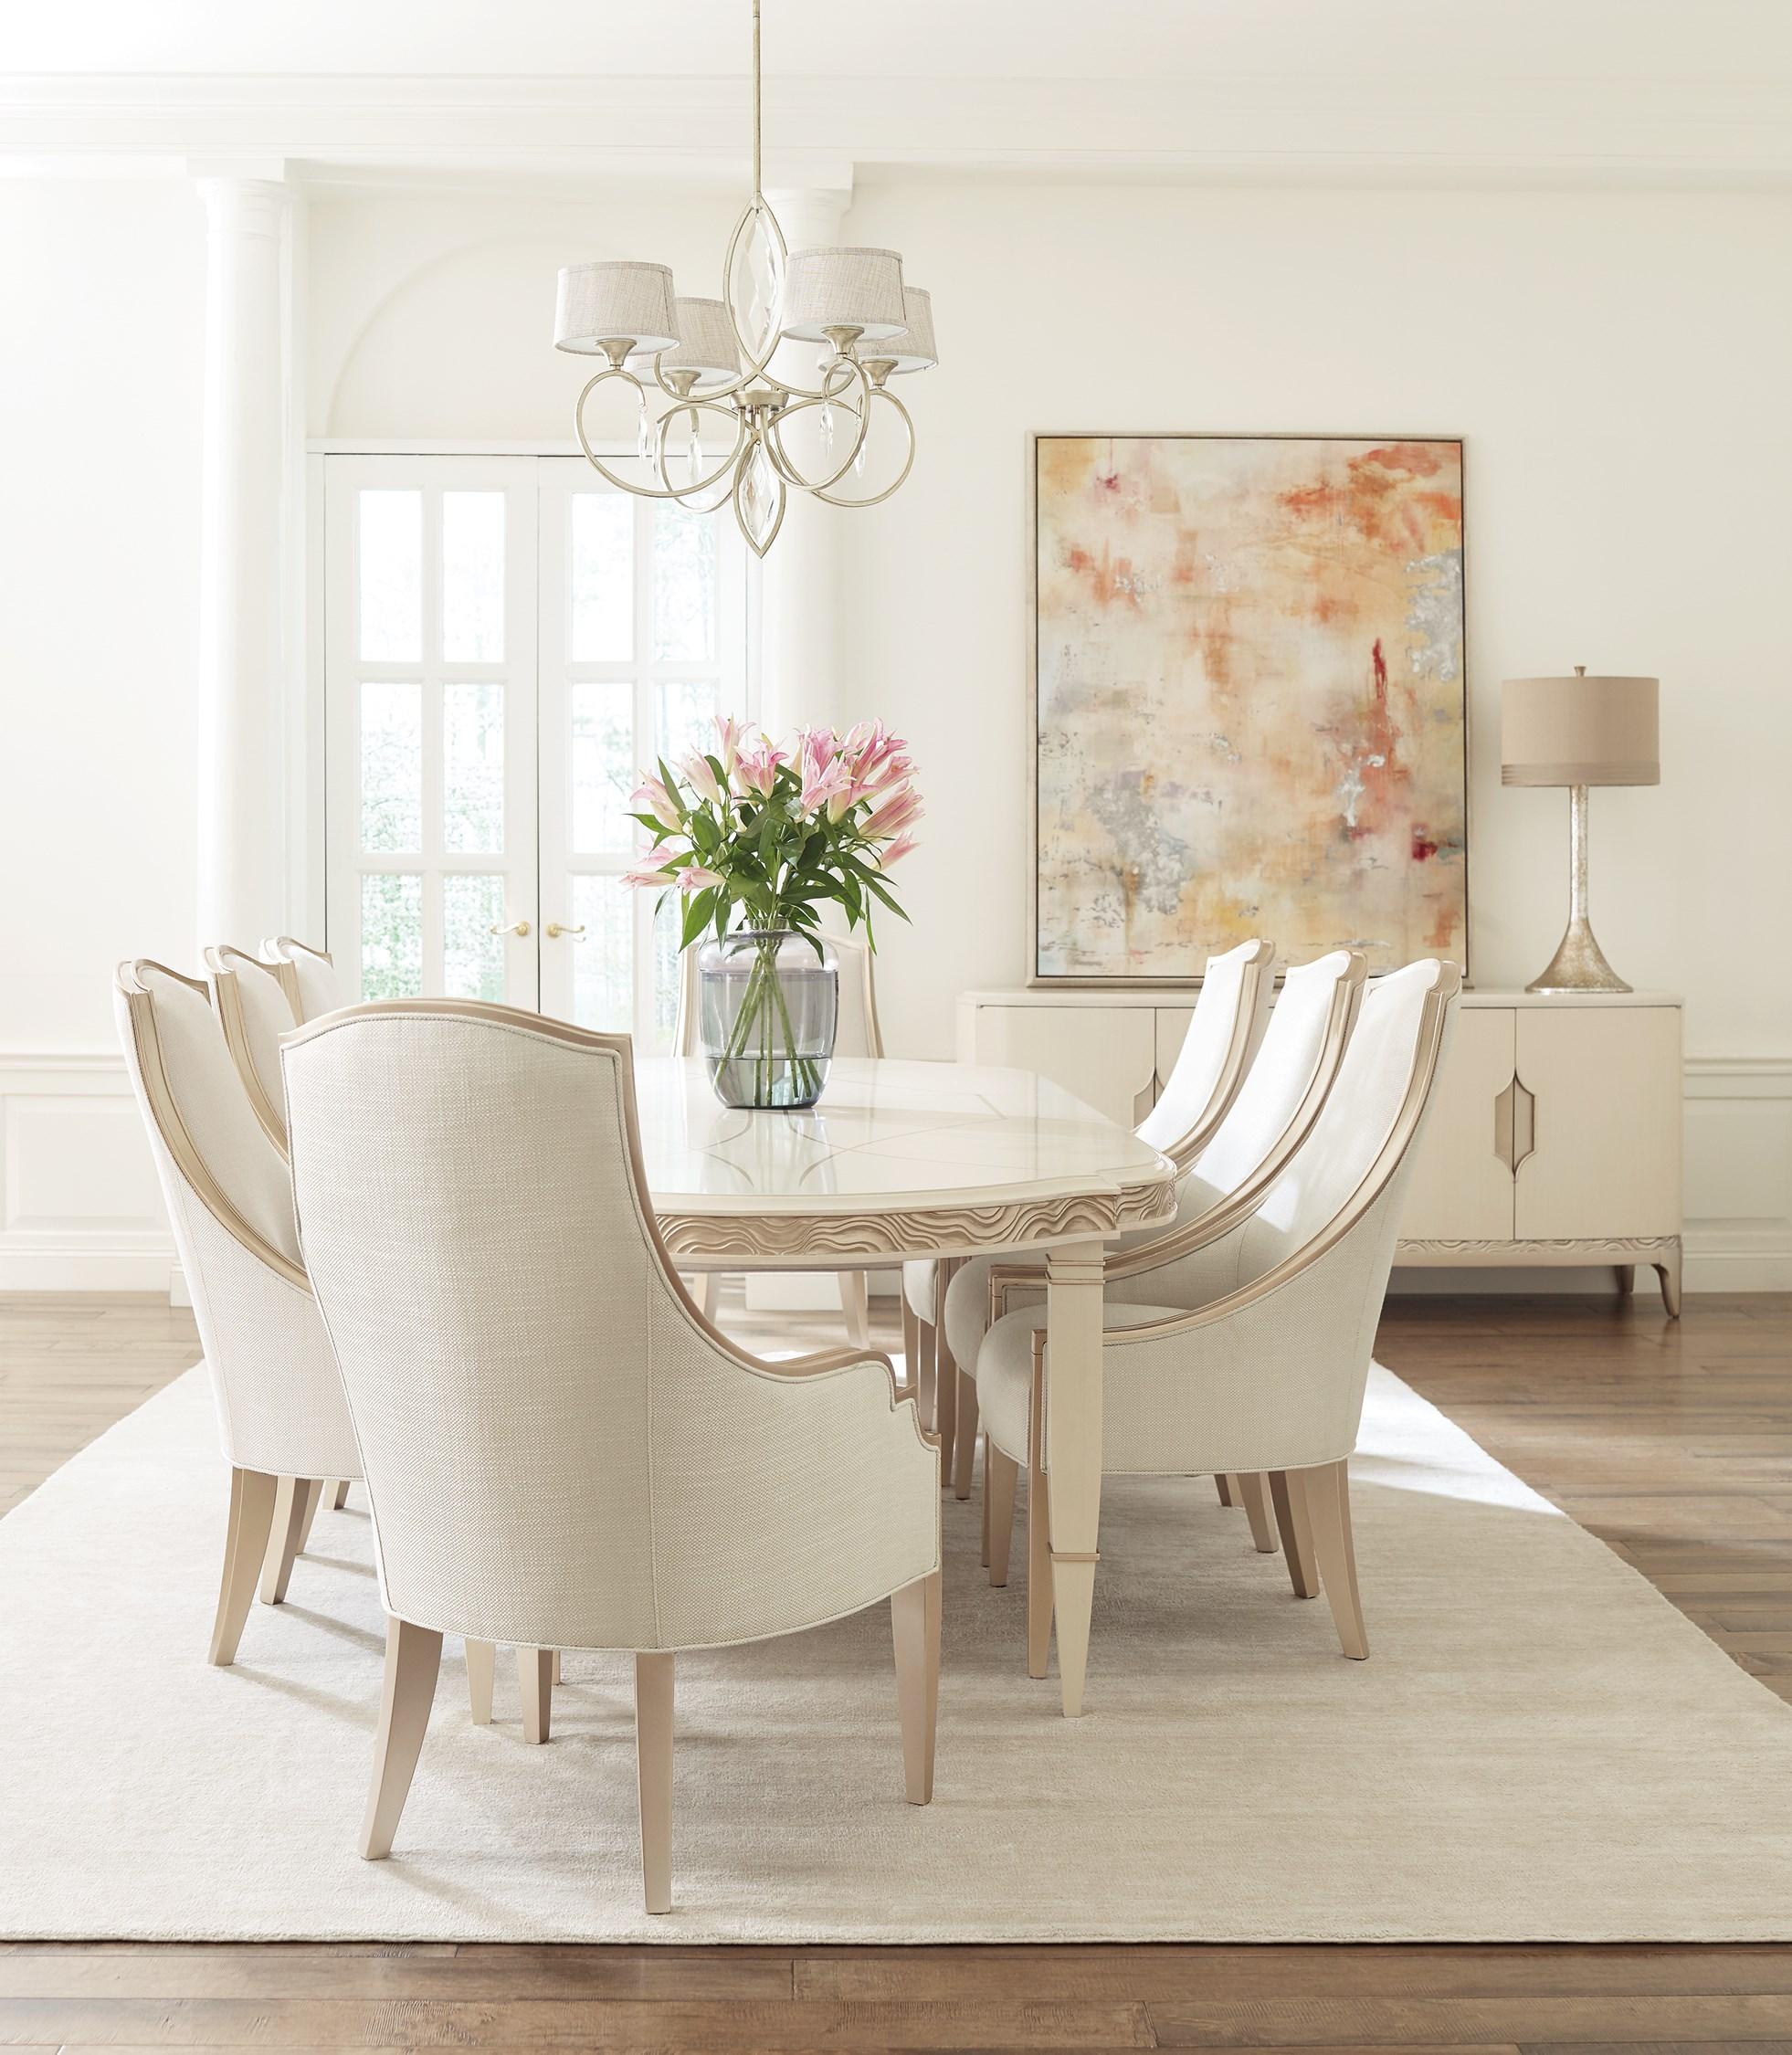 Contemporary Dining Table Set ADELA DINING TABLE / ADELA SIDE CHAIR / ADELA ARM CHAIR C012-016-201-Set-9 in Off-White, Light Grey, Taupe Fabric